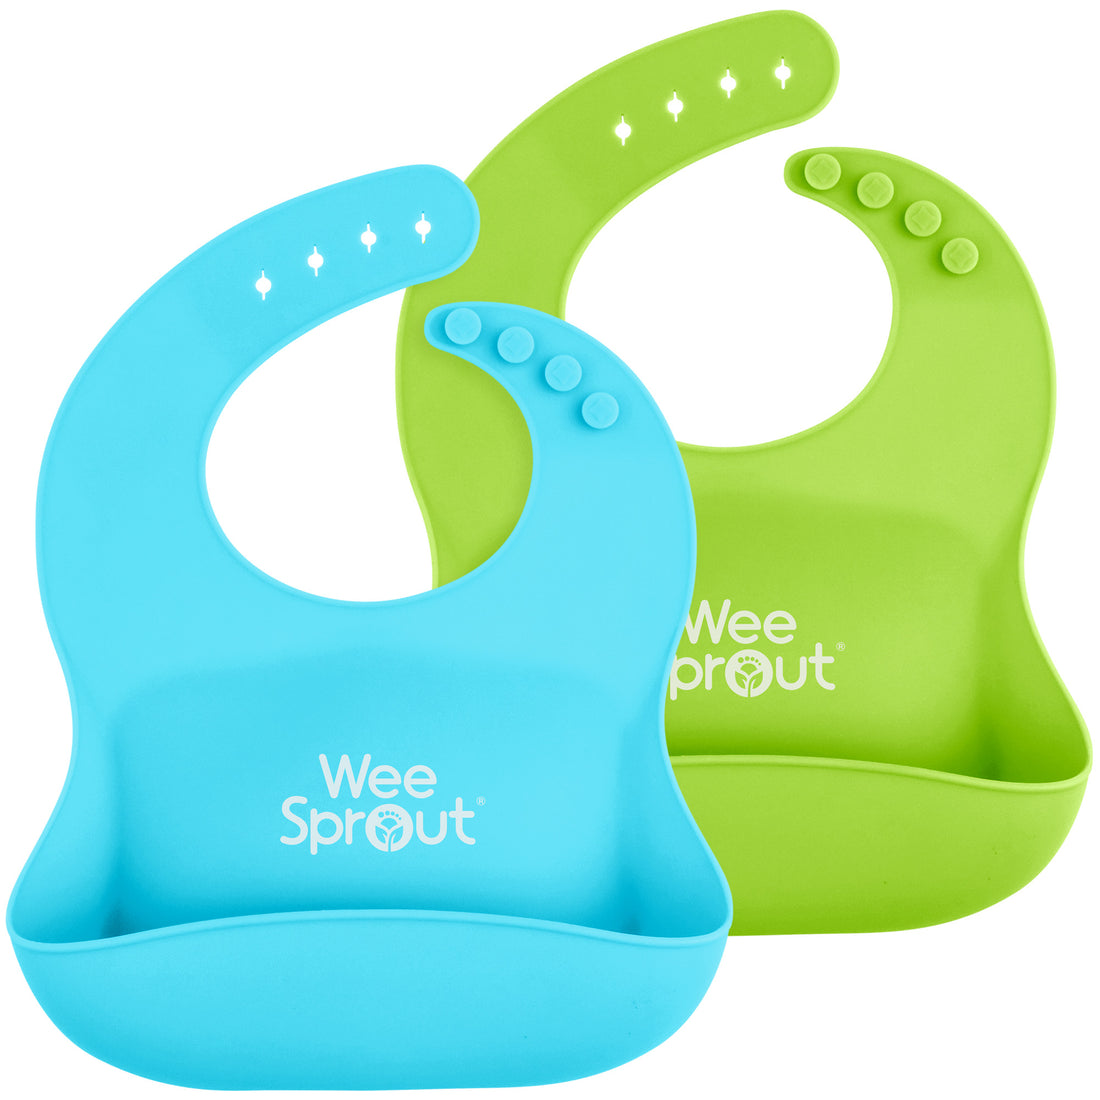 Weesprout Spoons - Feed Well Co.